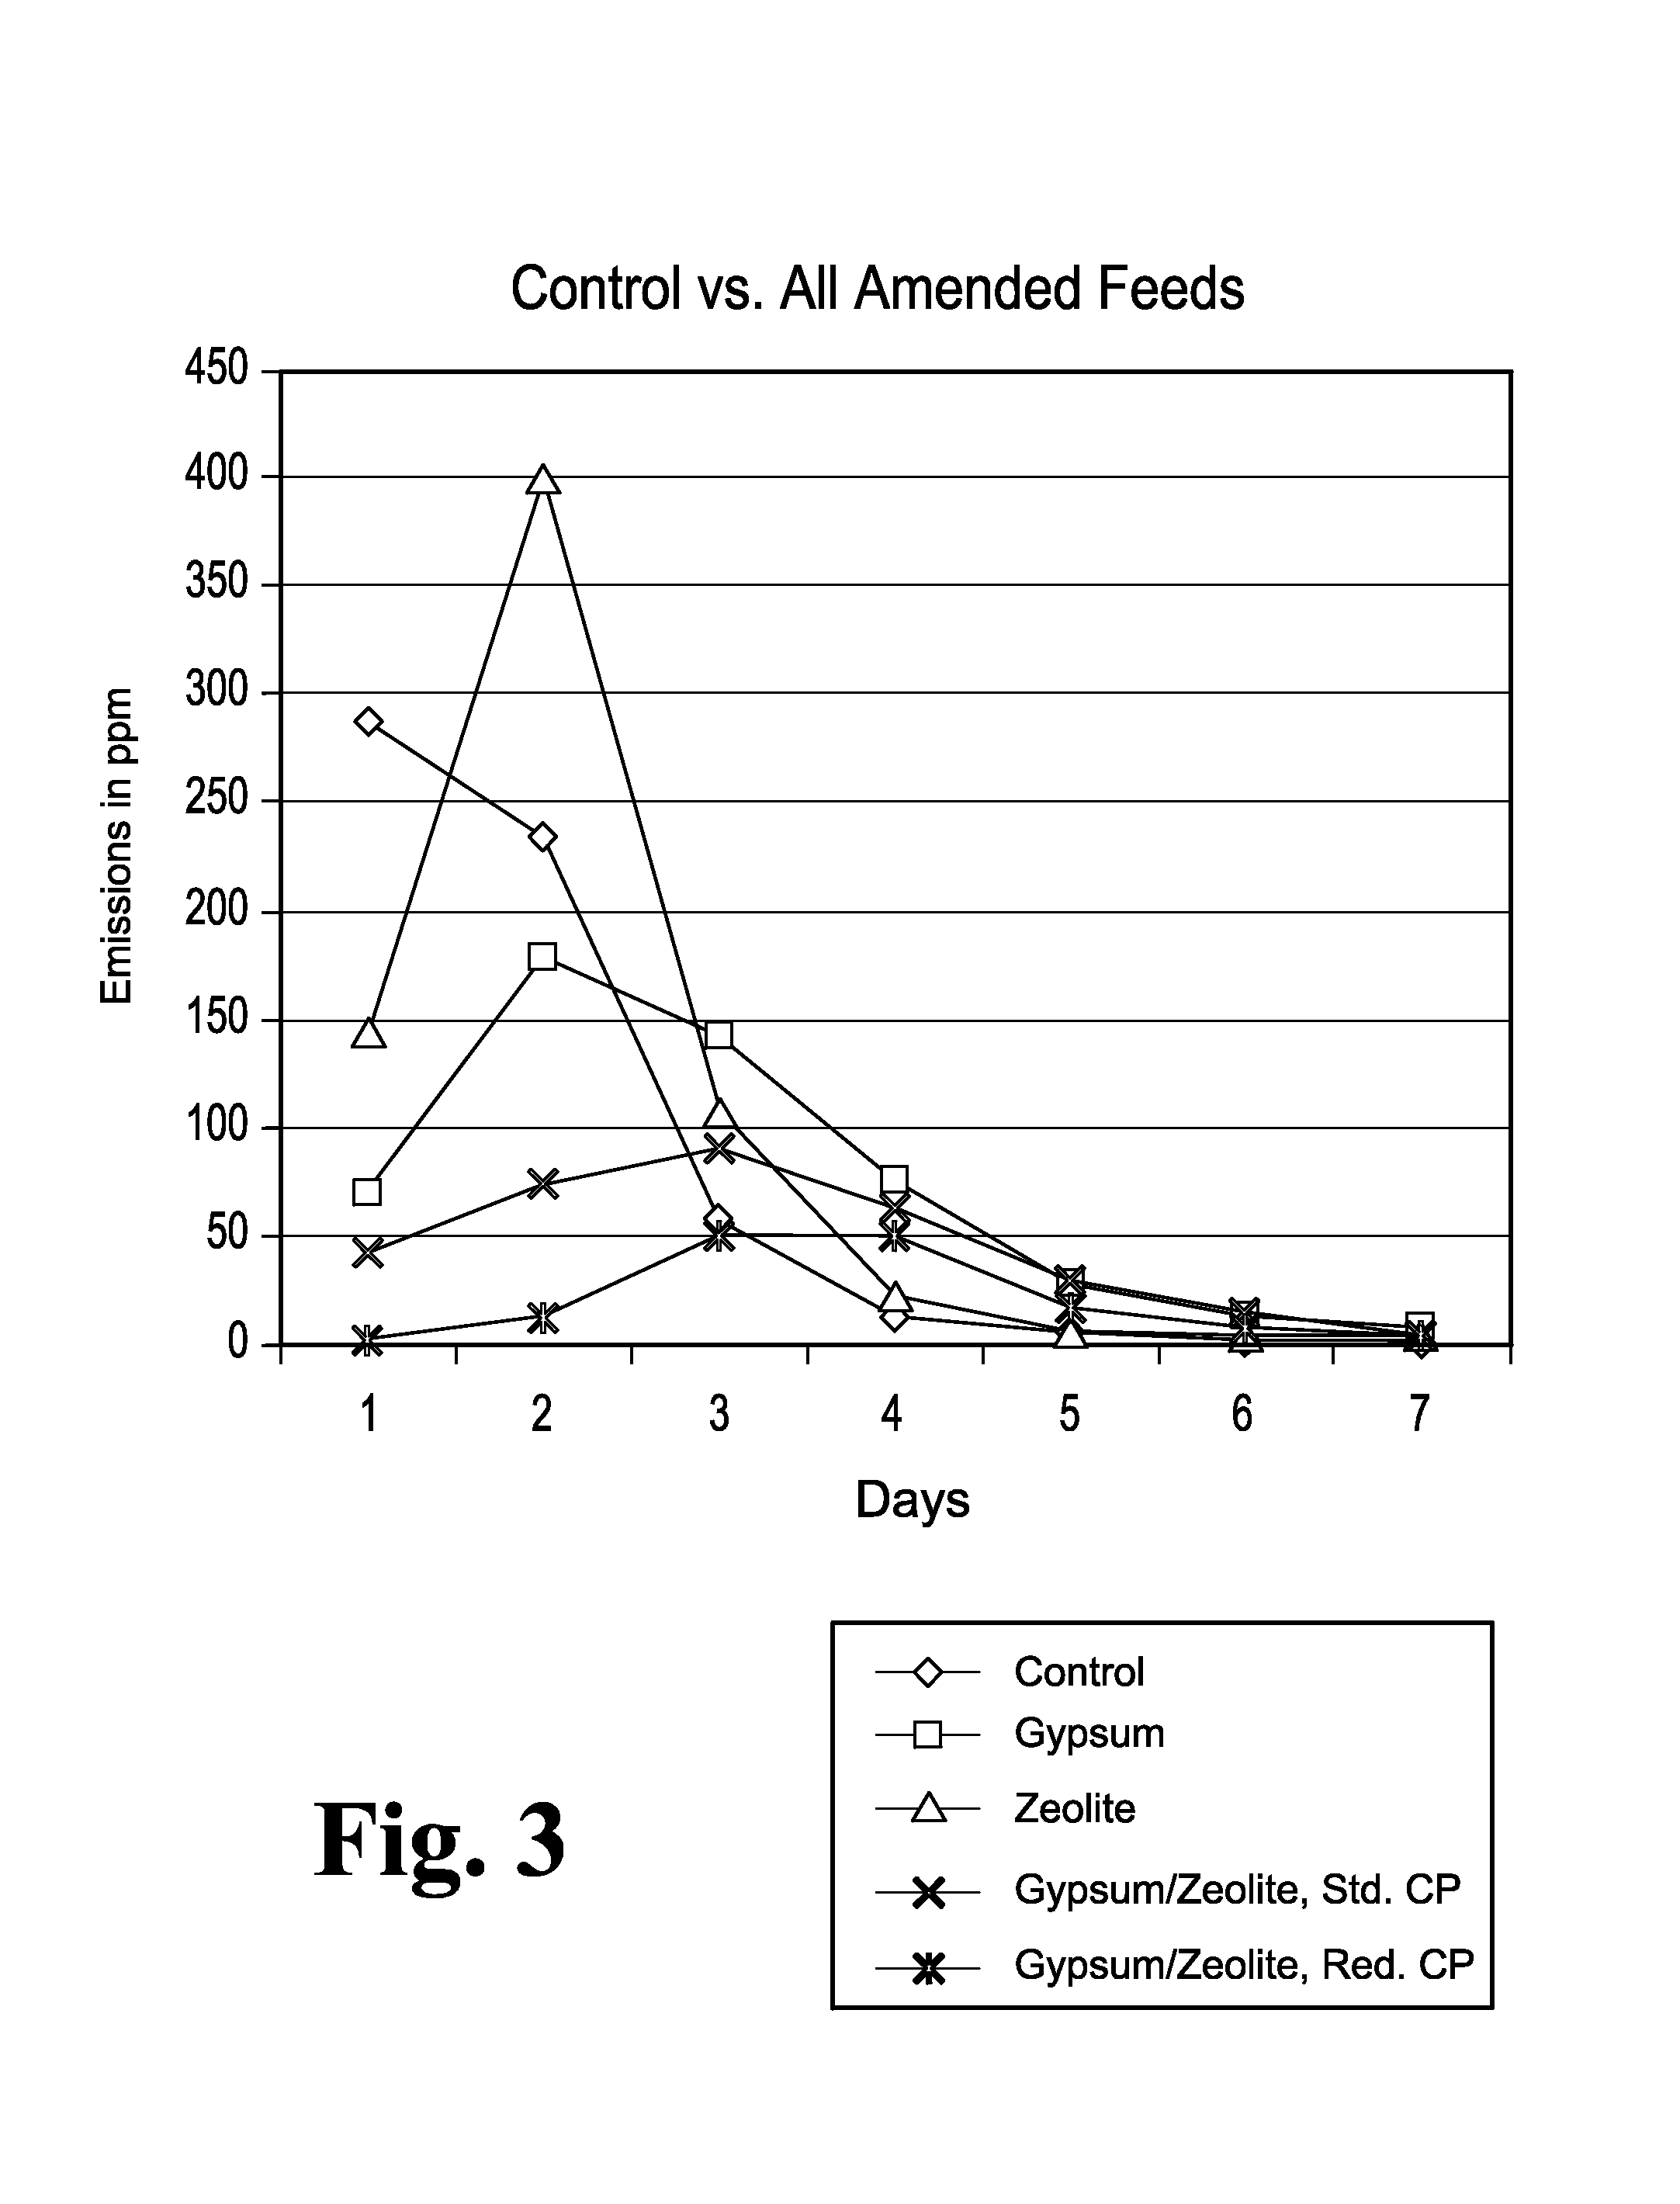 Animal feed and methods for reducing ammonia and phosphorus levels in manure